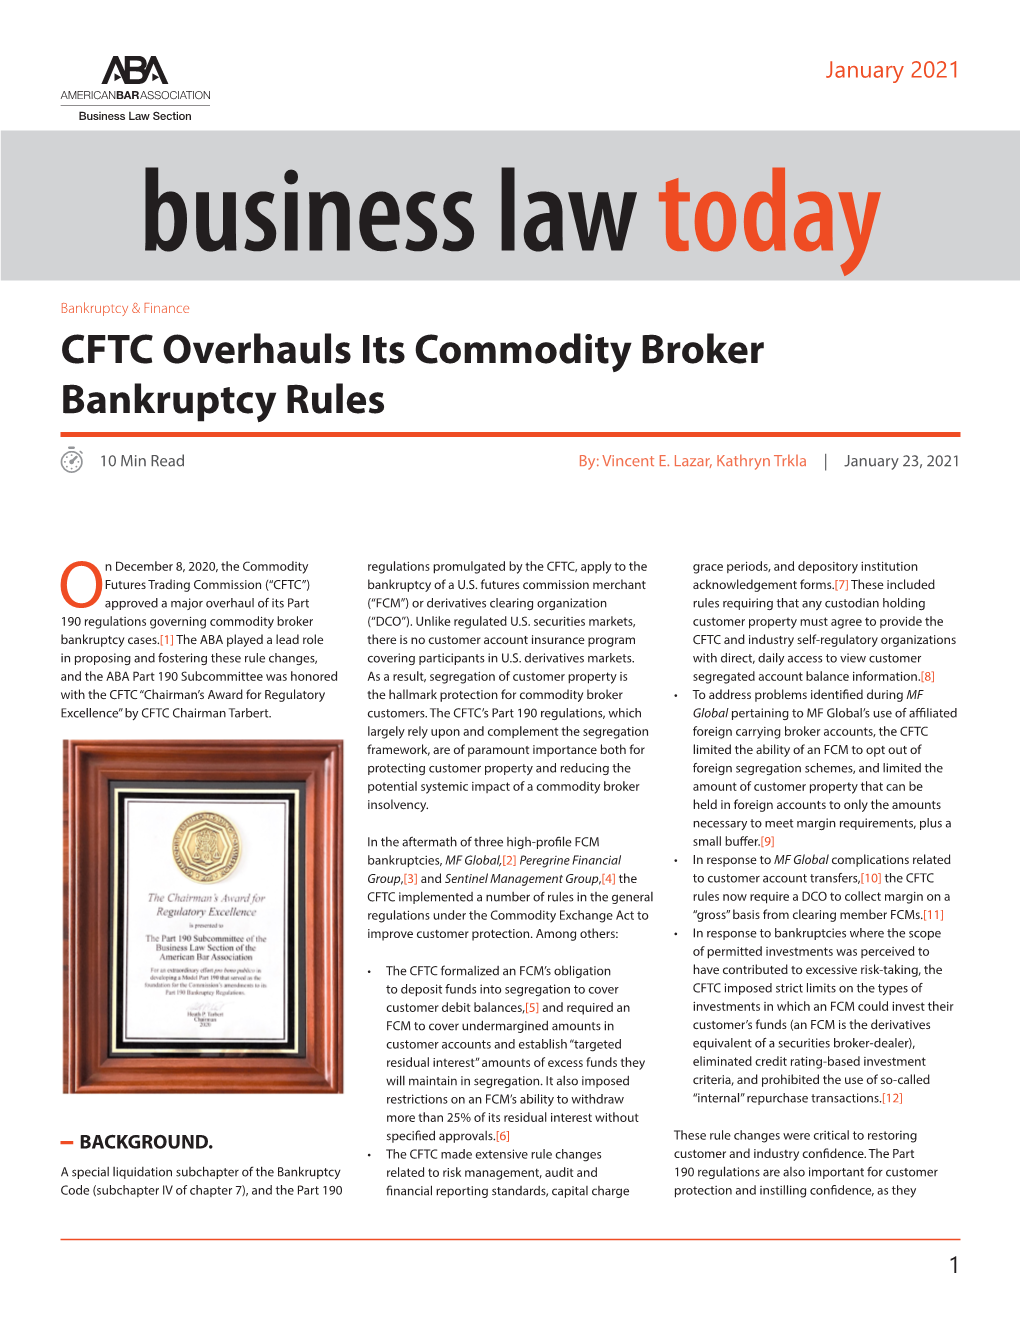 CFTC Overhauls Its Commodity Broker Bankruptcy Rules